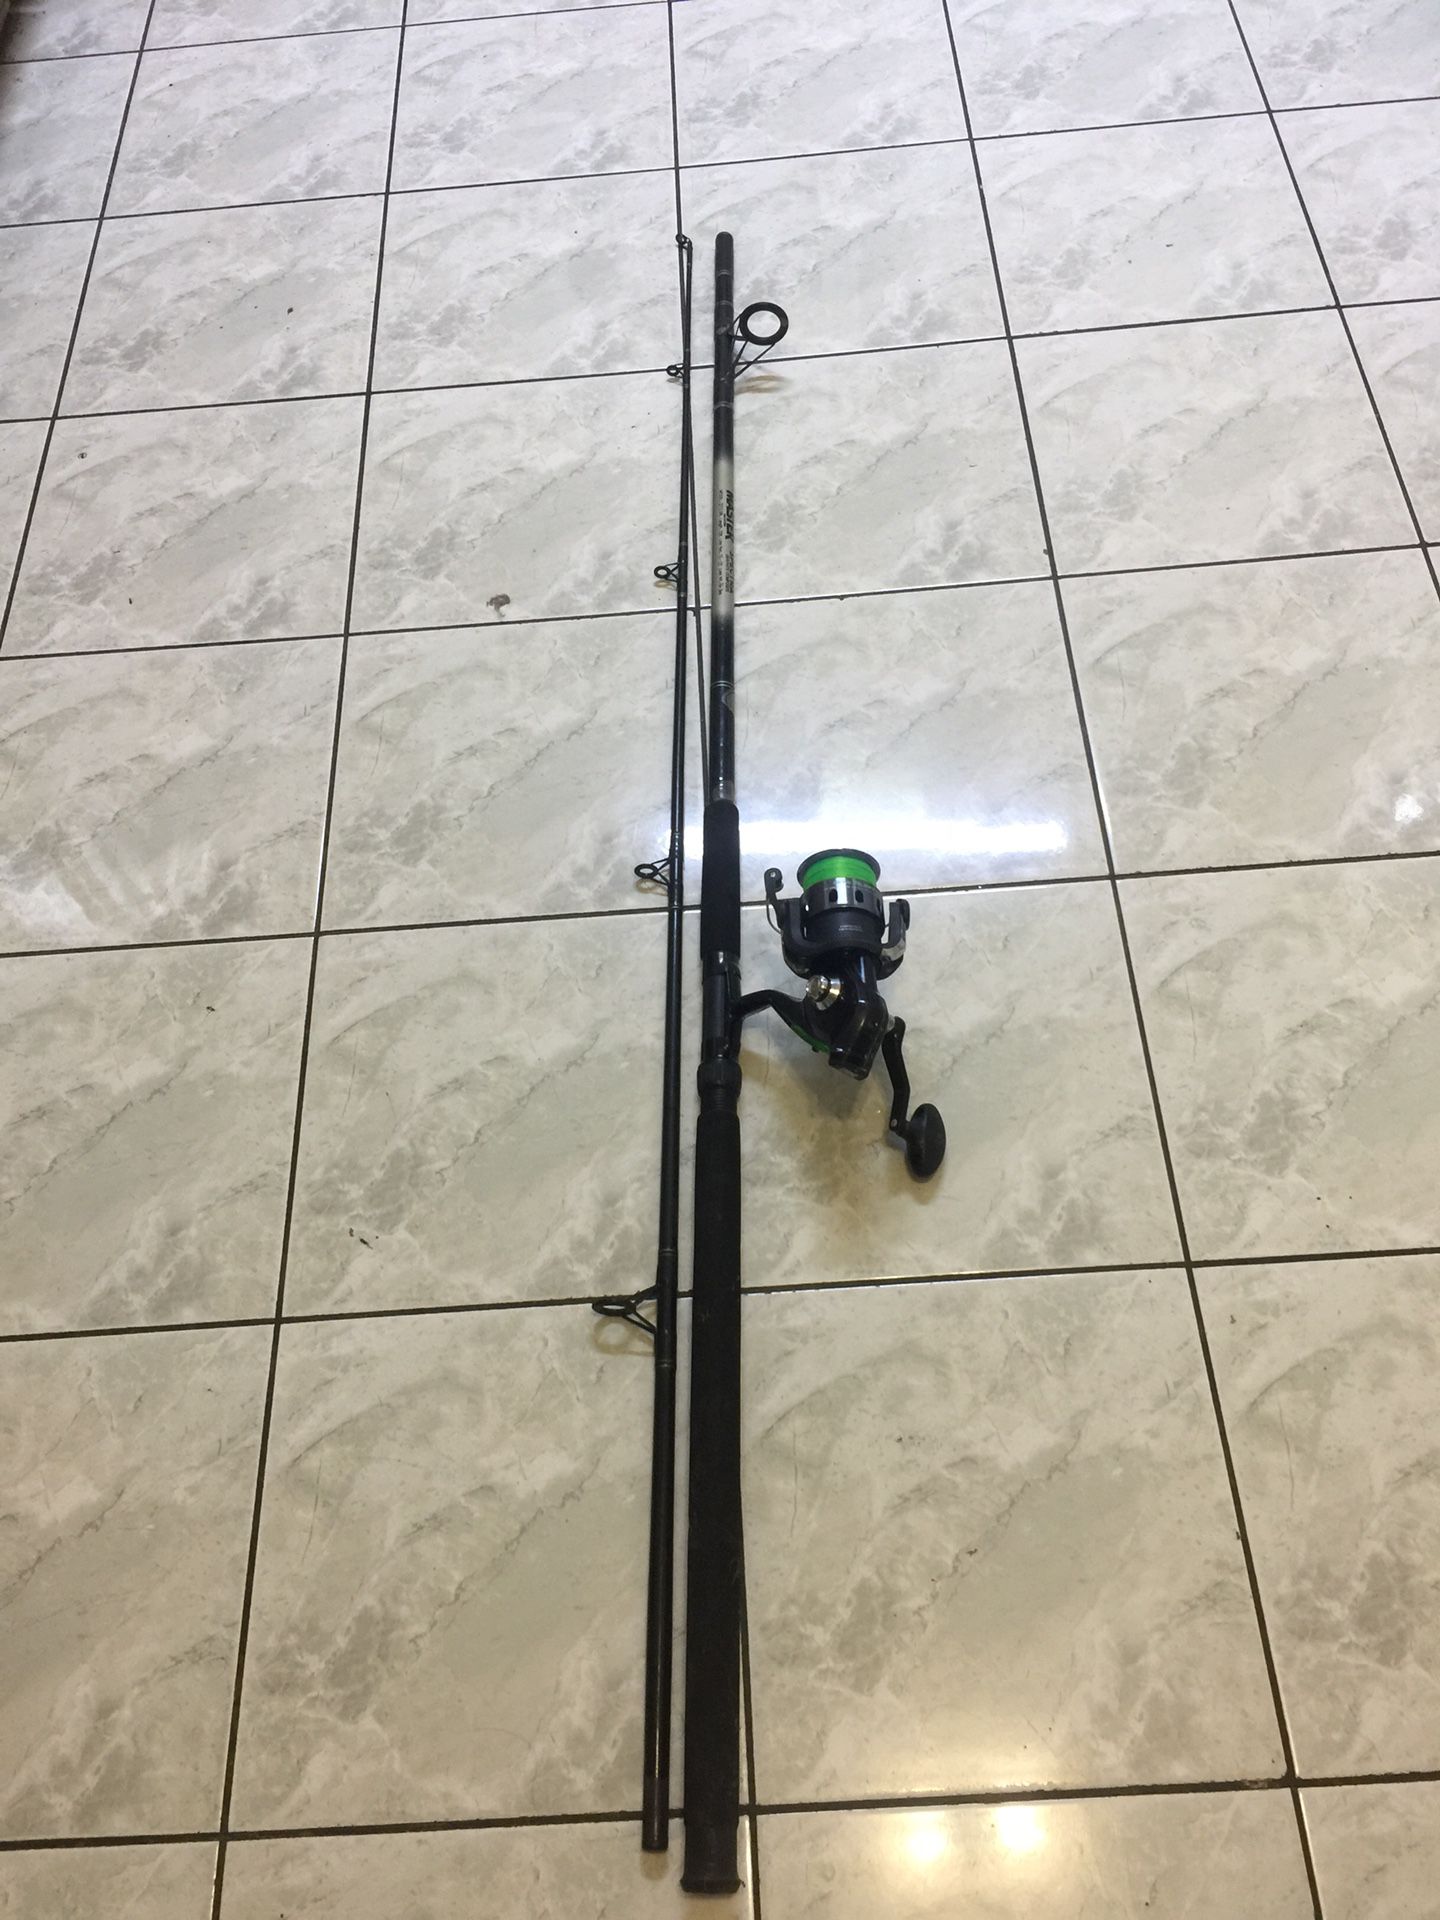 Master Spectra fishing rod 10ft 15-25lbs with Zebco fishing reel $$50 for  Sale in Midway City, CA - OfferUp